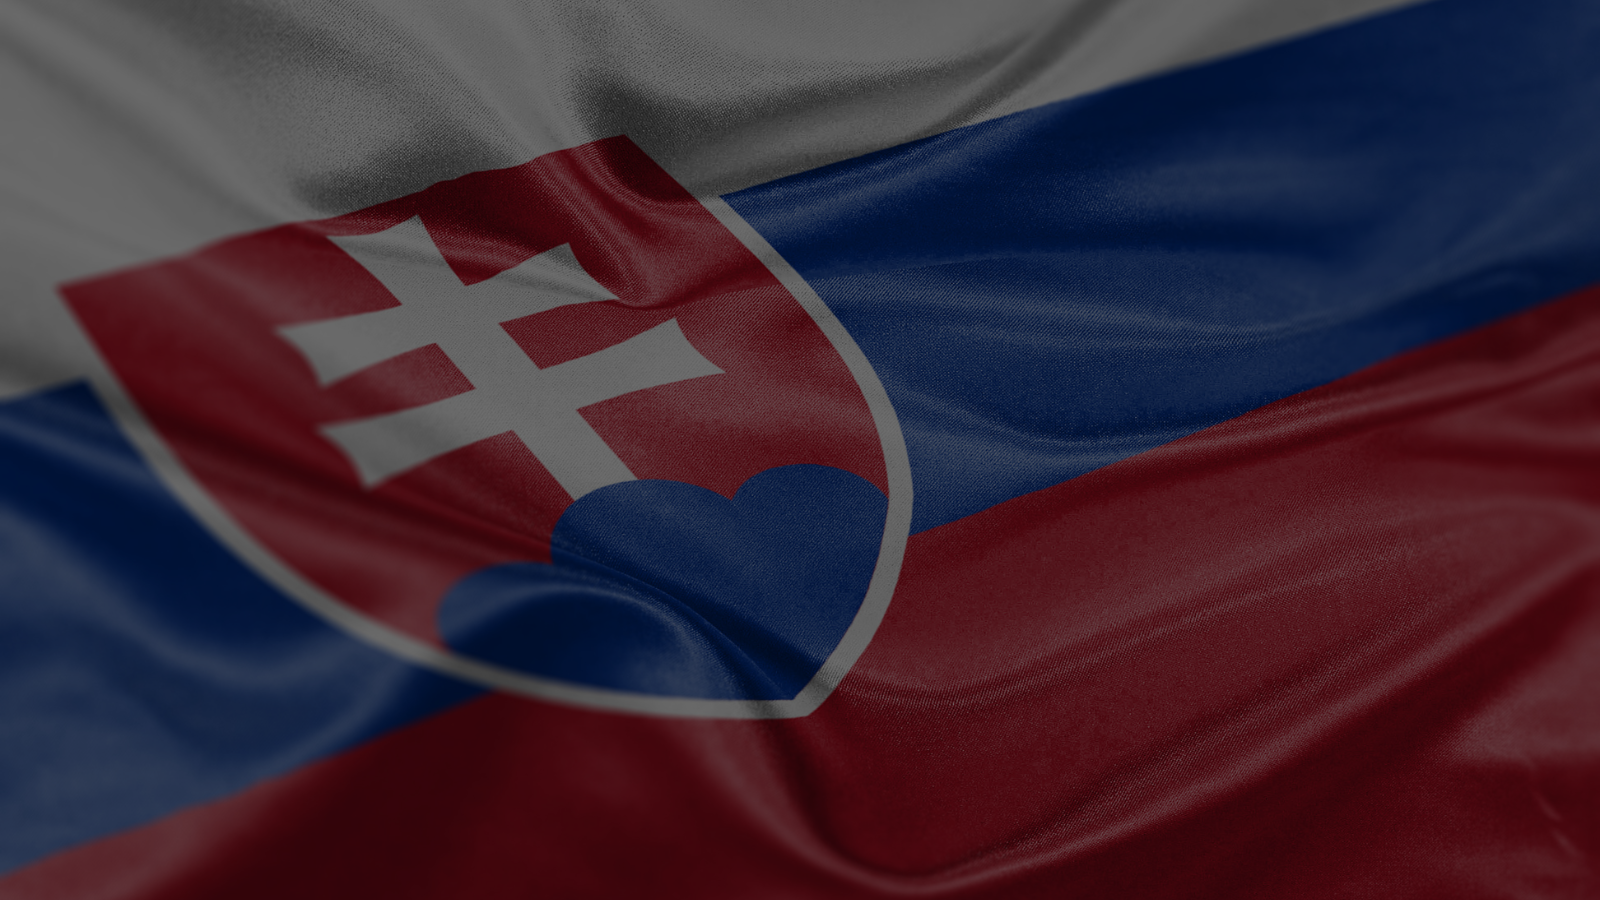 Slovakia’s relations with Asia–Pacific in light of the snap election